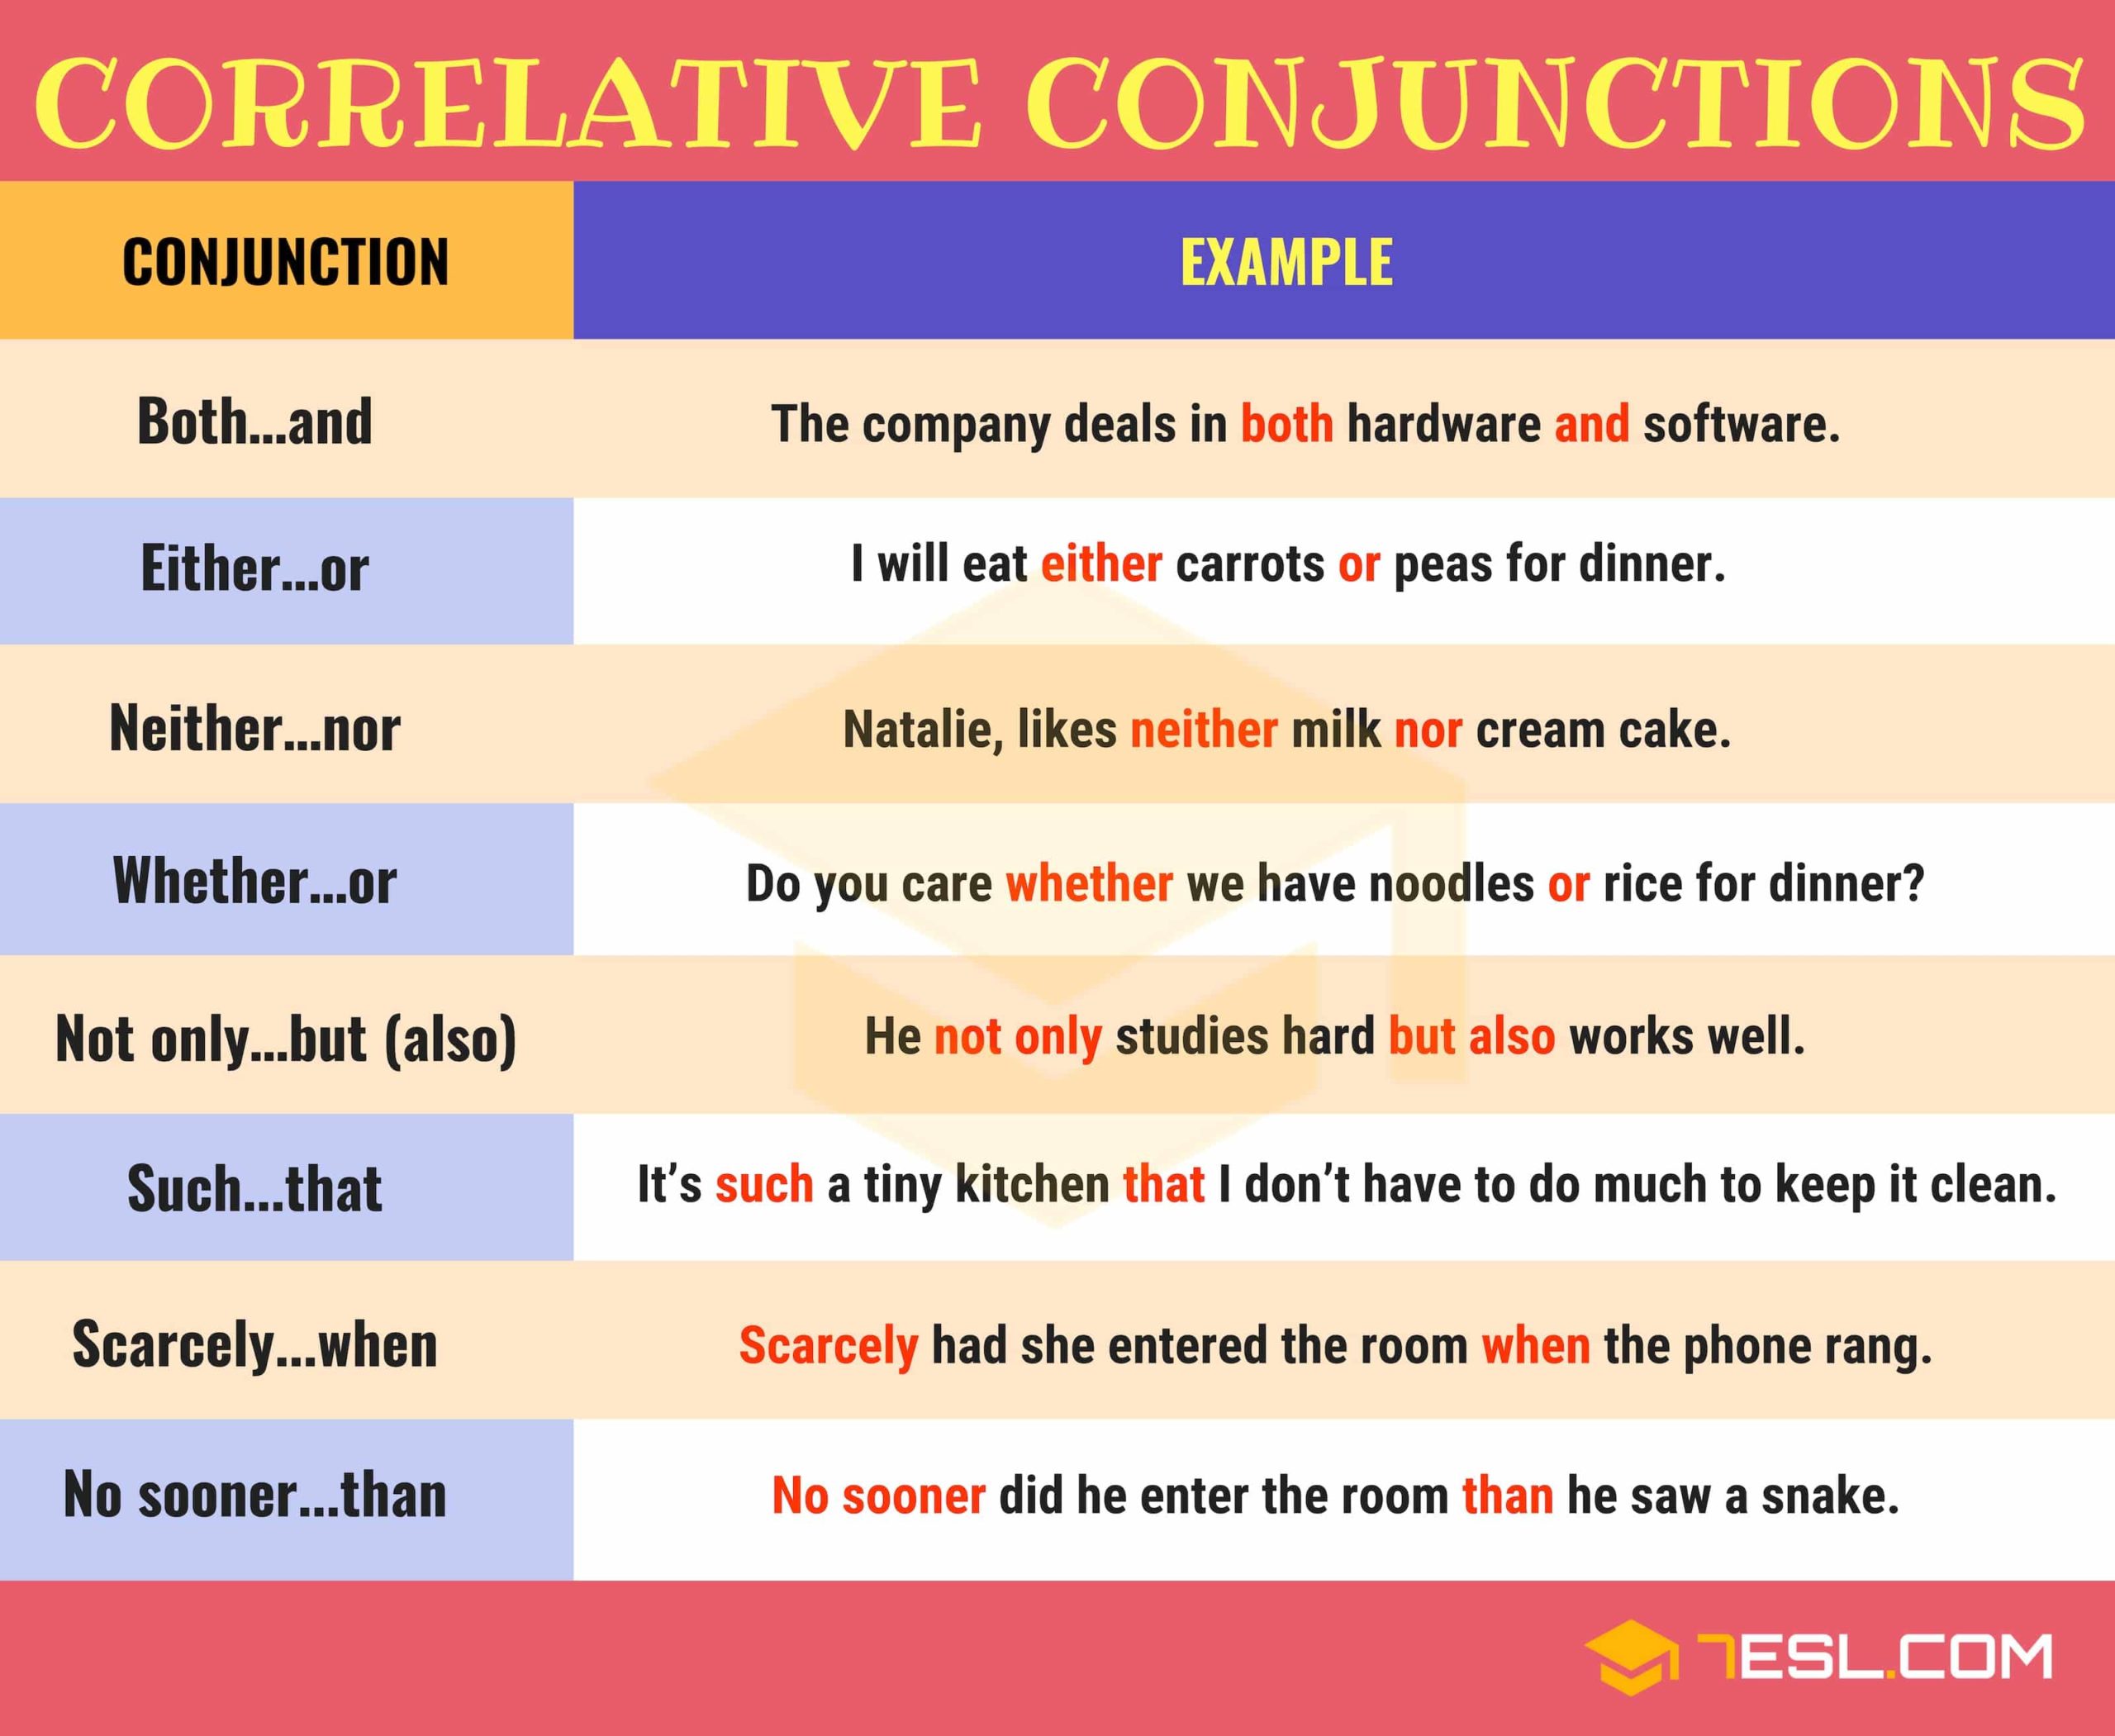 What Are The 7 Correlative Conjunctions